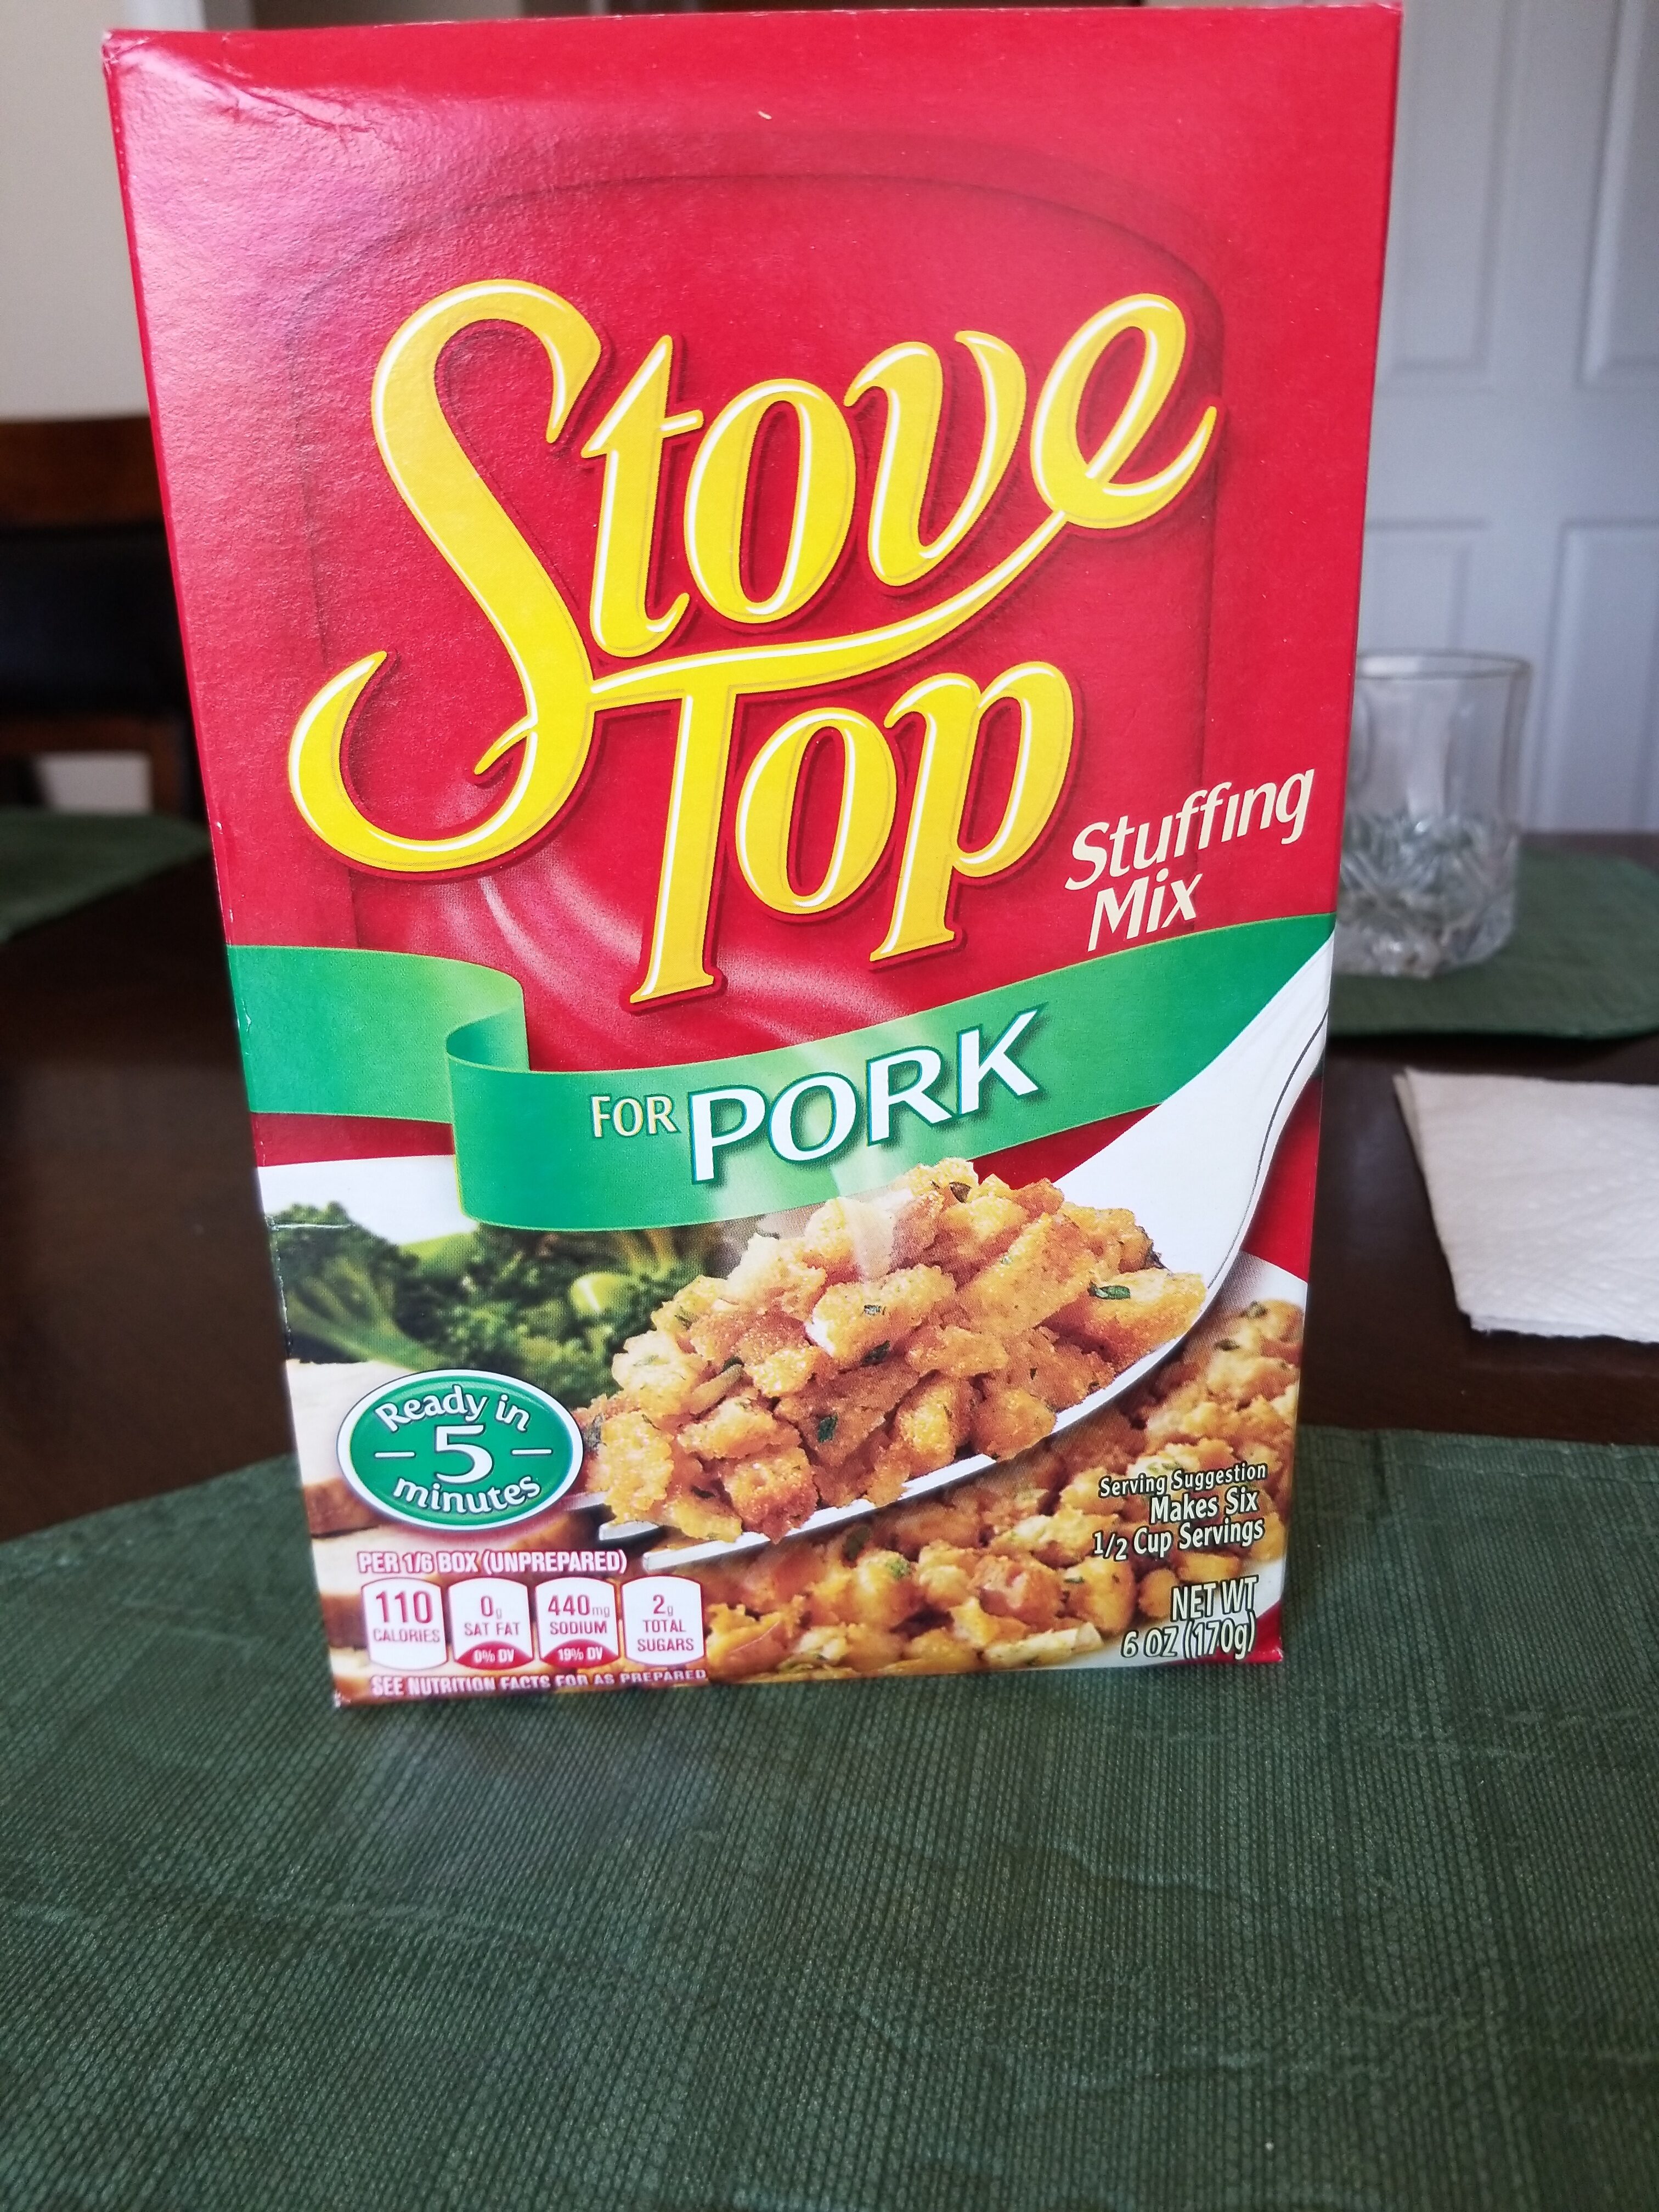 Stove Top Stuffing mix, pork - Product